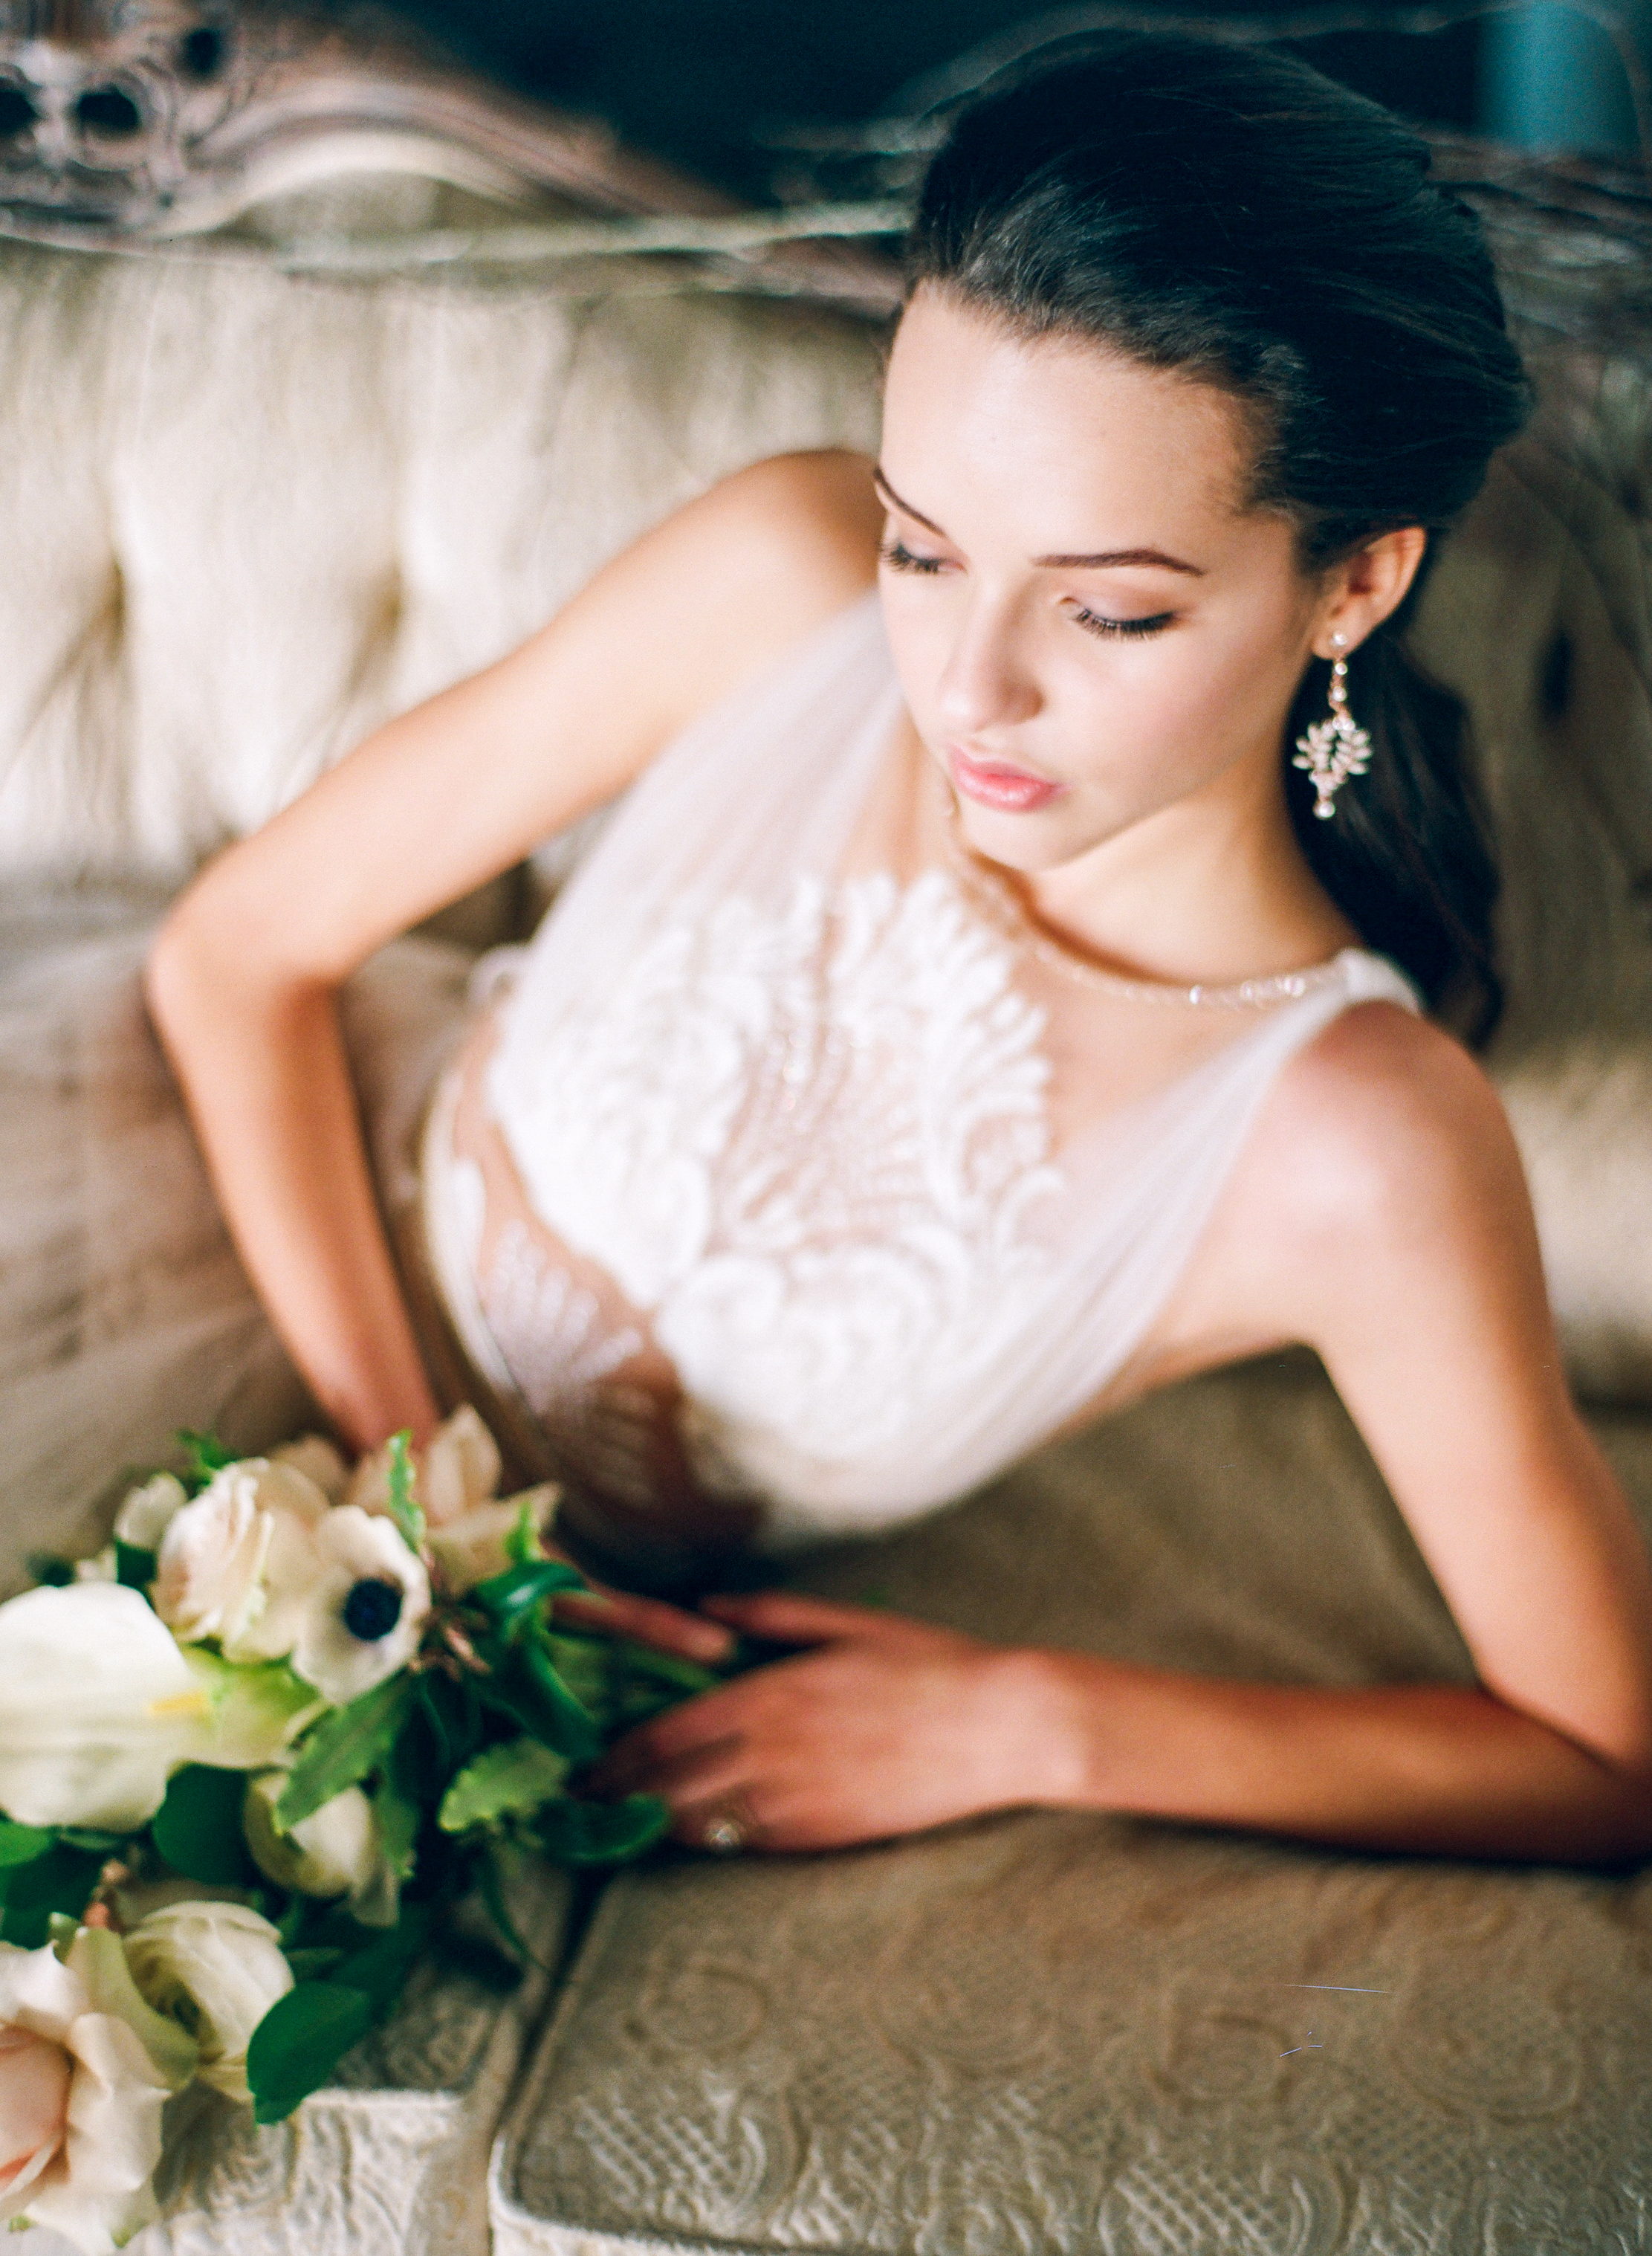  Galia Lahav "Flavia" gown from Little White Dress Bridal Shop | Connie Whitlock Photography | at Moss in Denver 